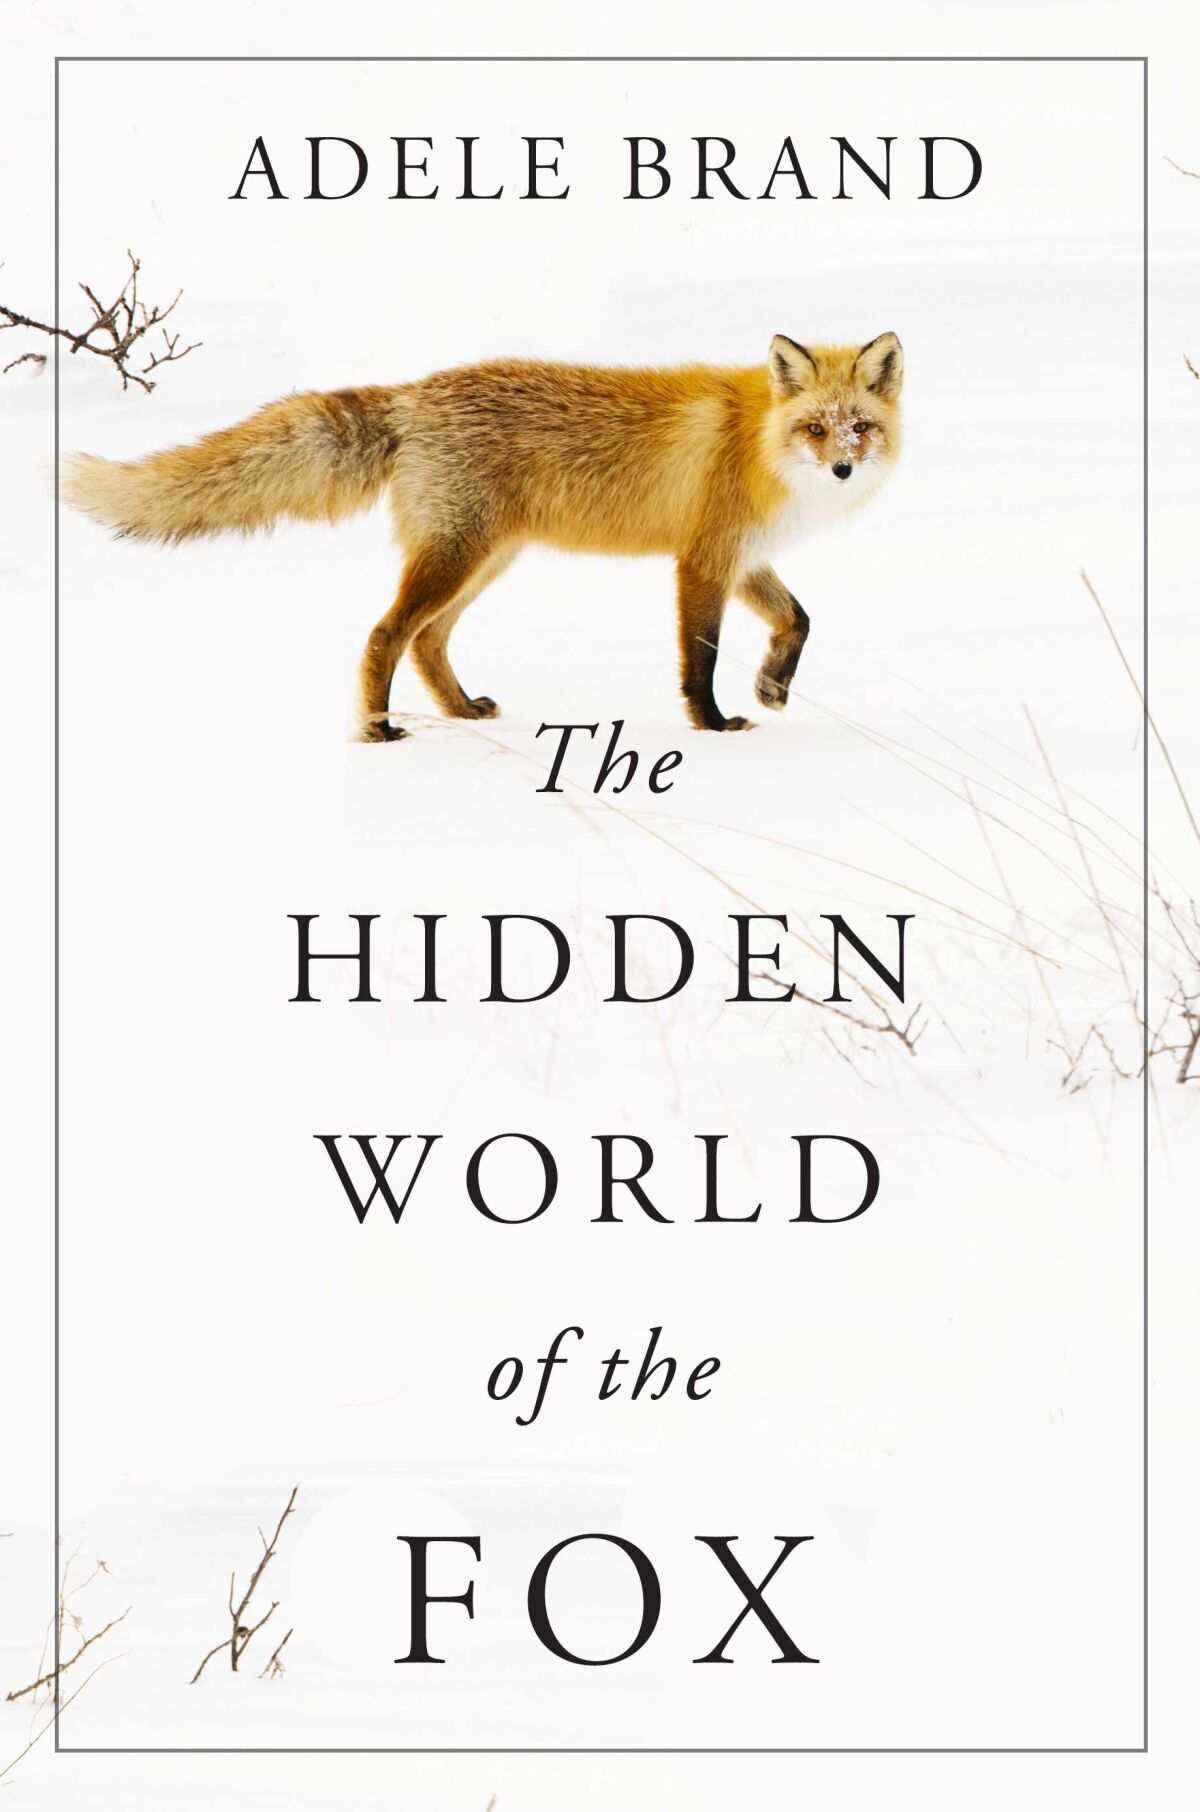 "The Hidden World of the Fox," by Adele Brand. Credit: William Morrow